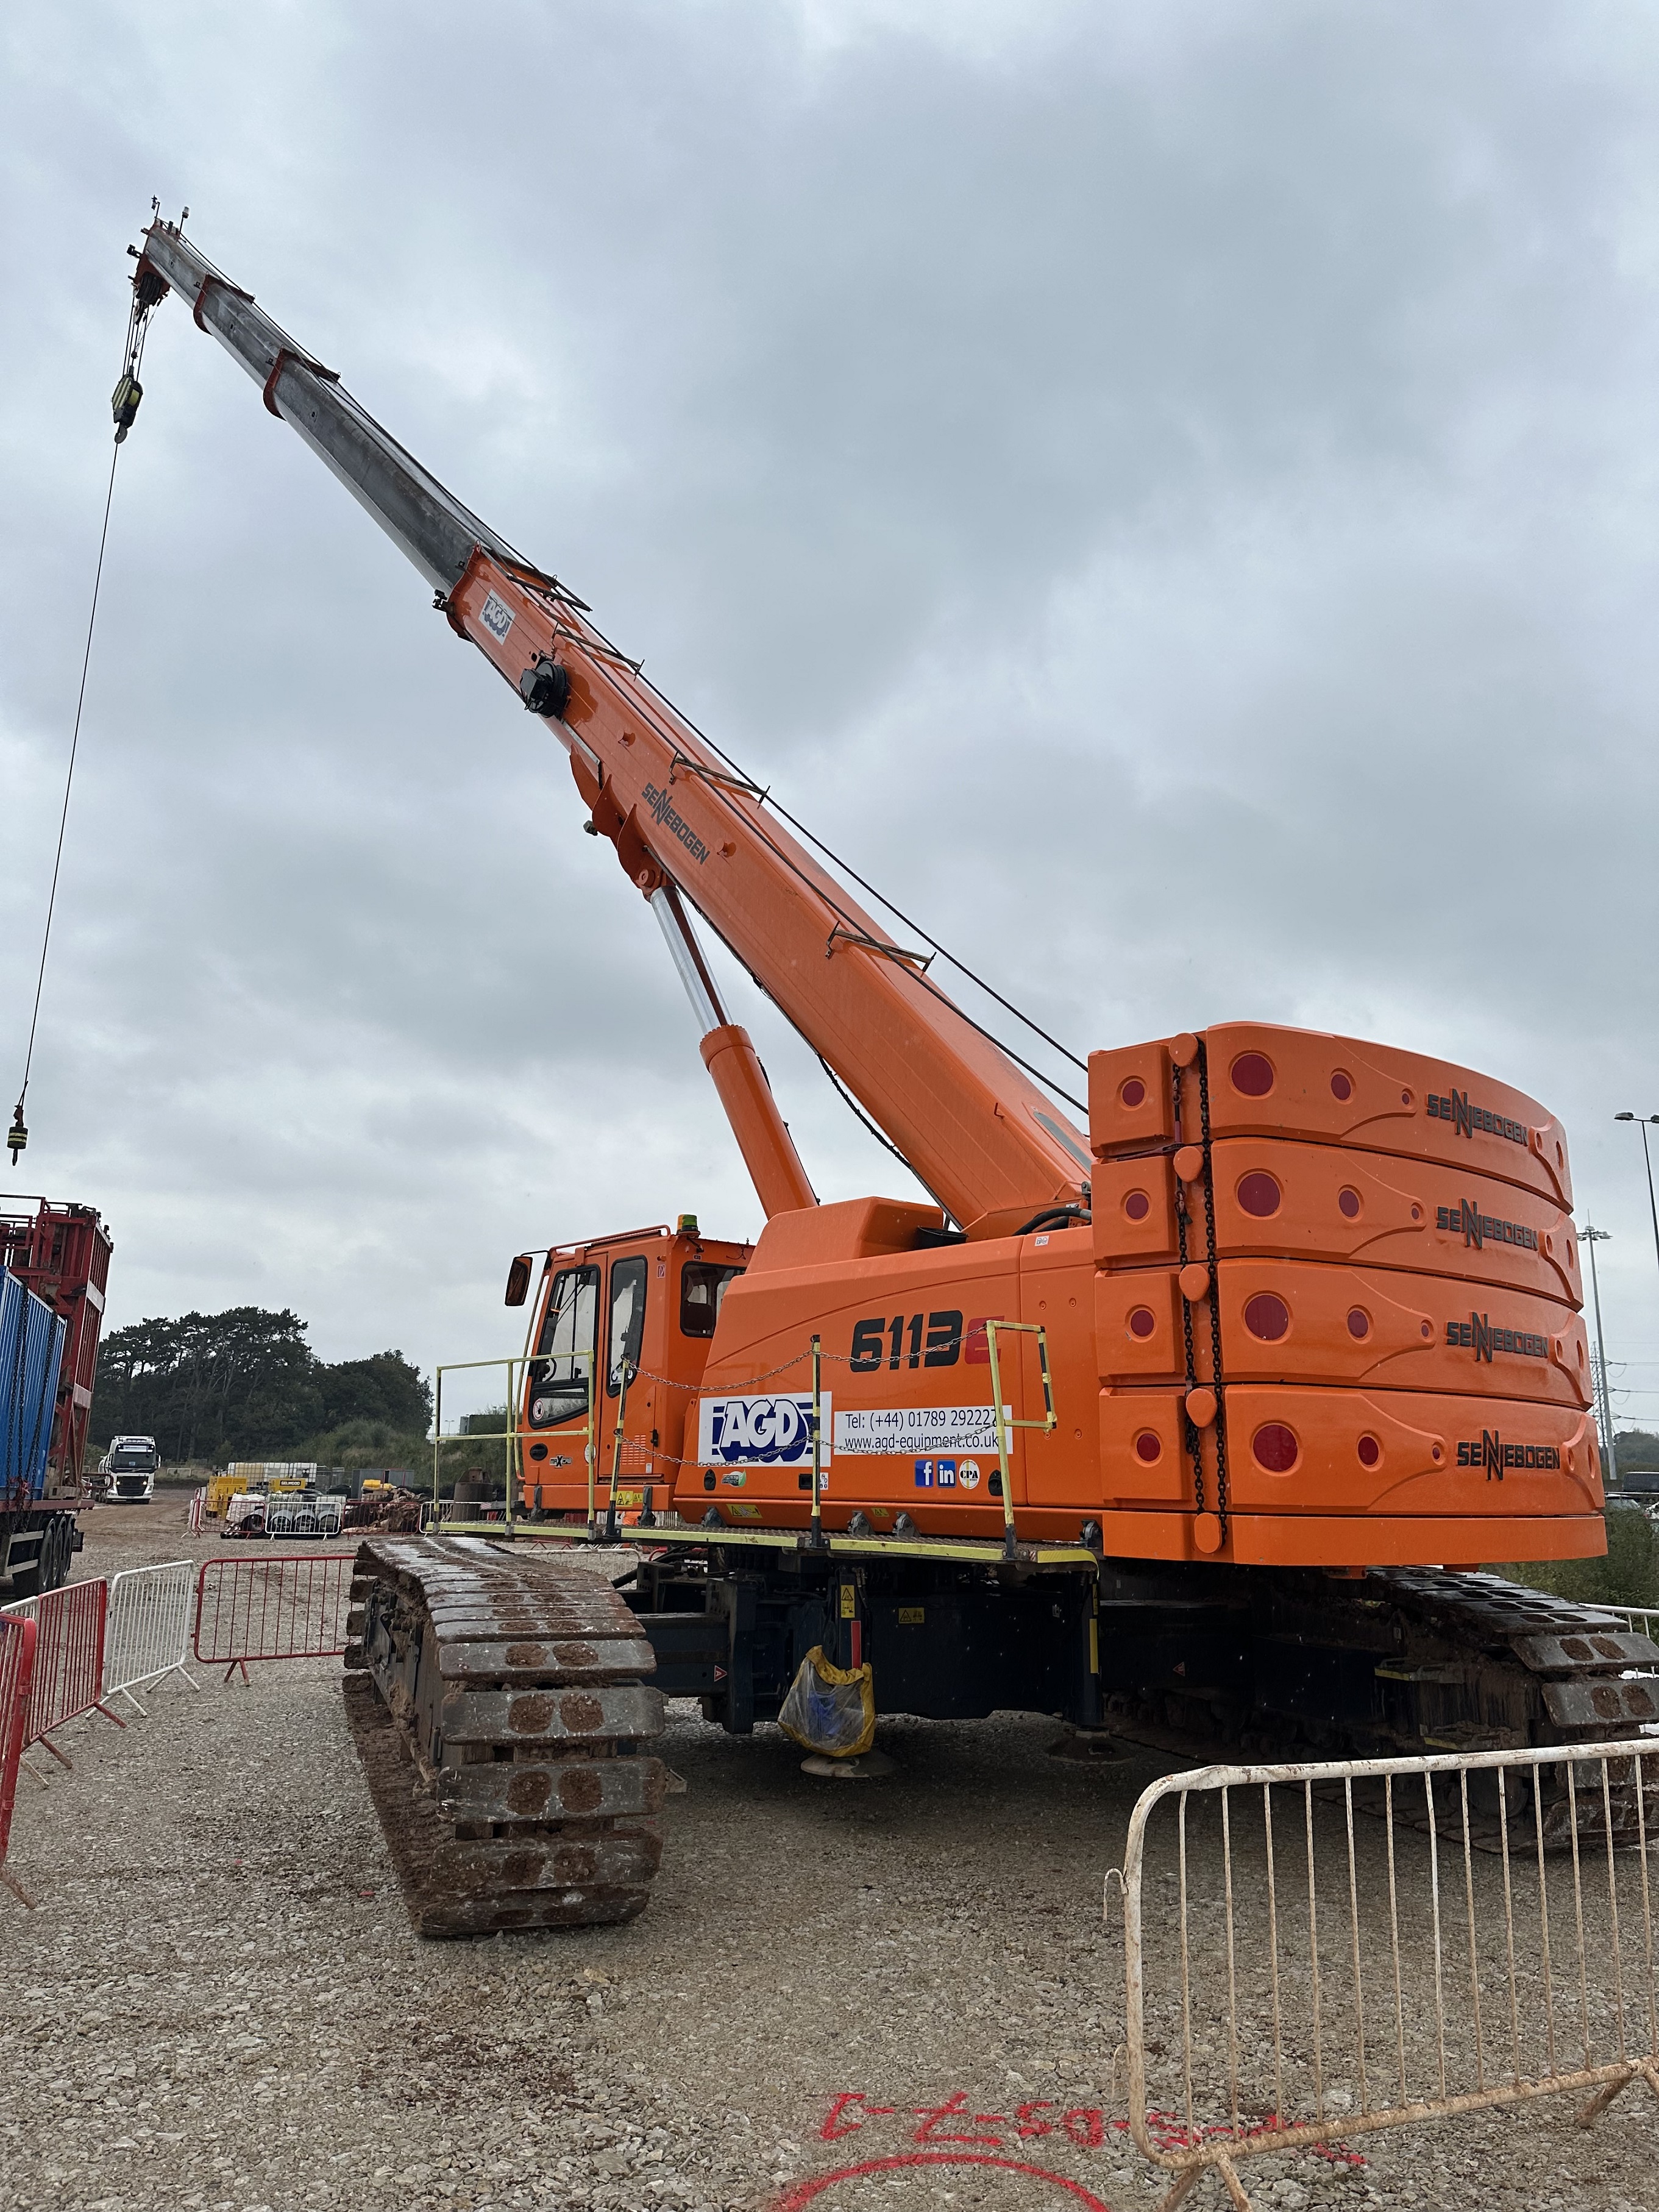 Suppliers of Advanced Hydraulic Crawler Crane Hire Solutions UK